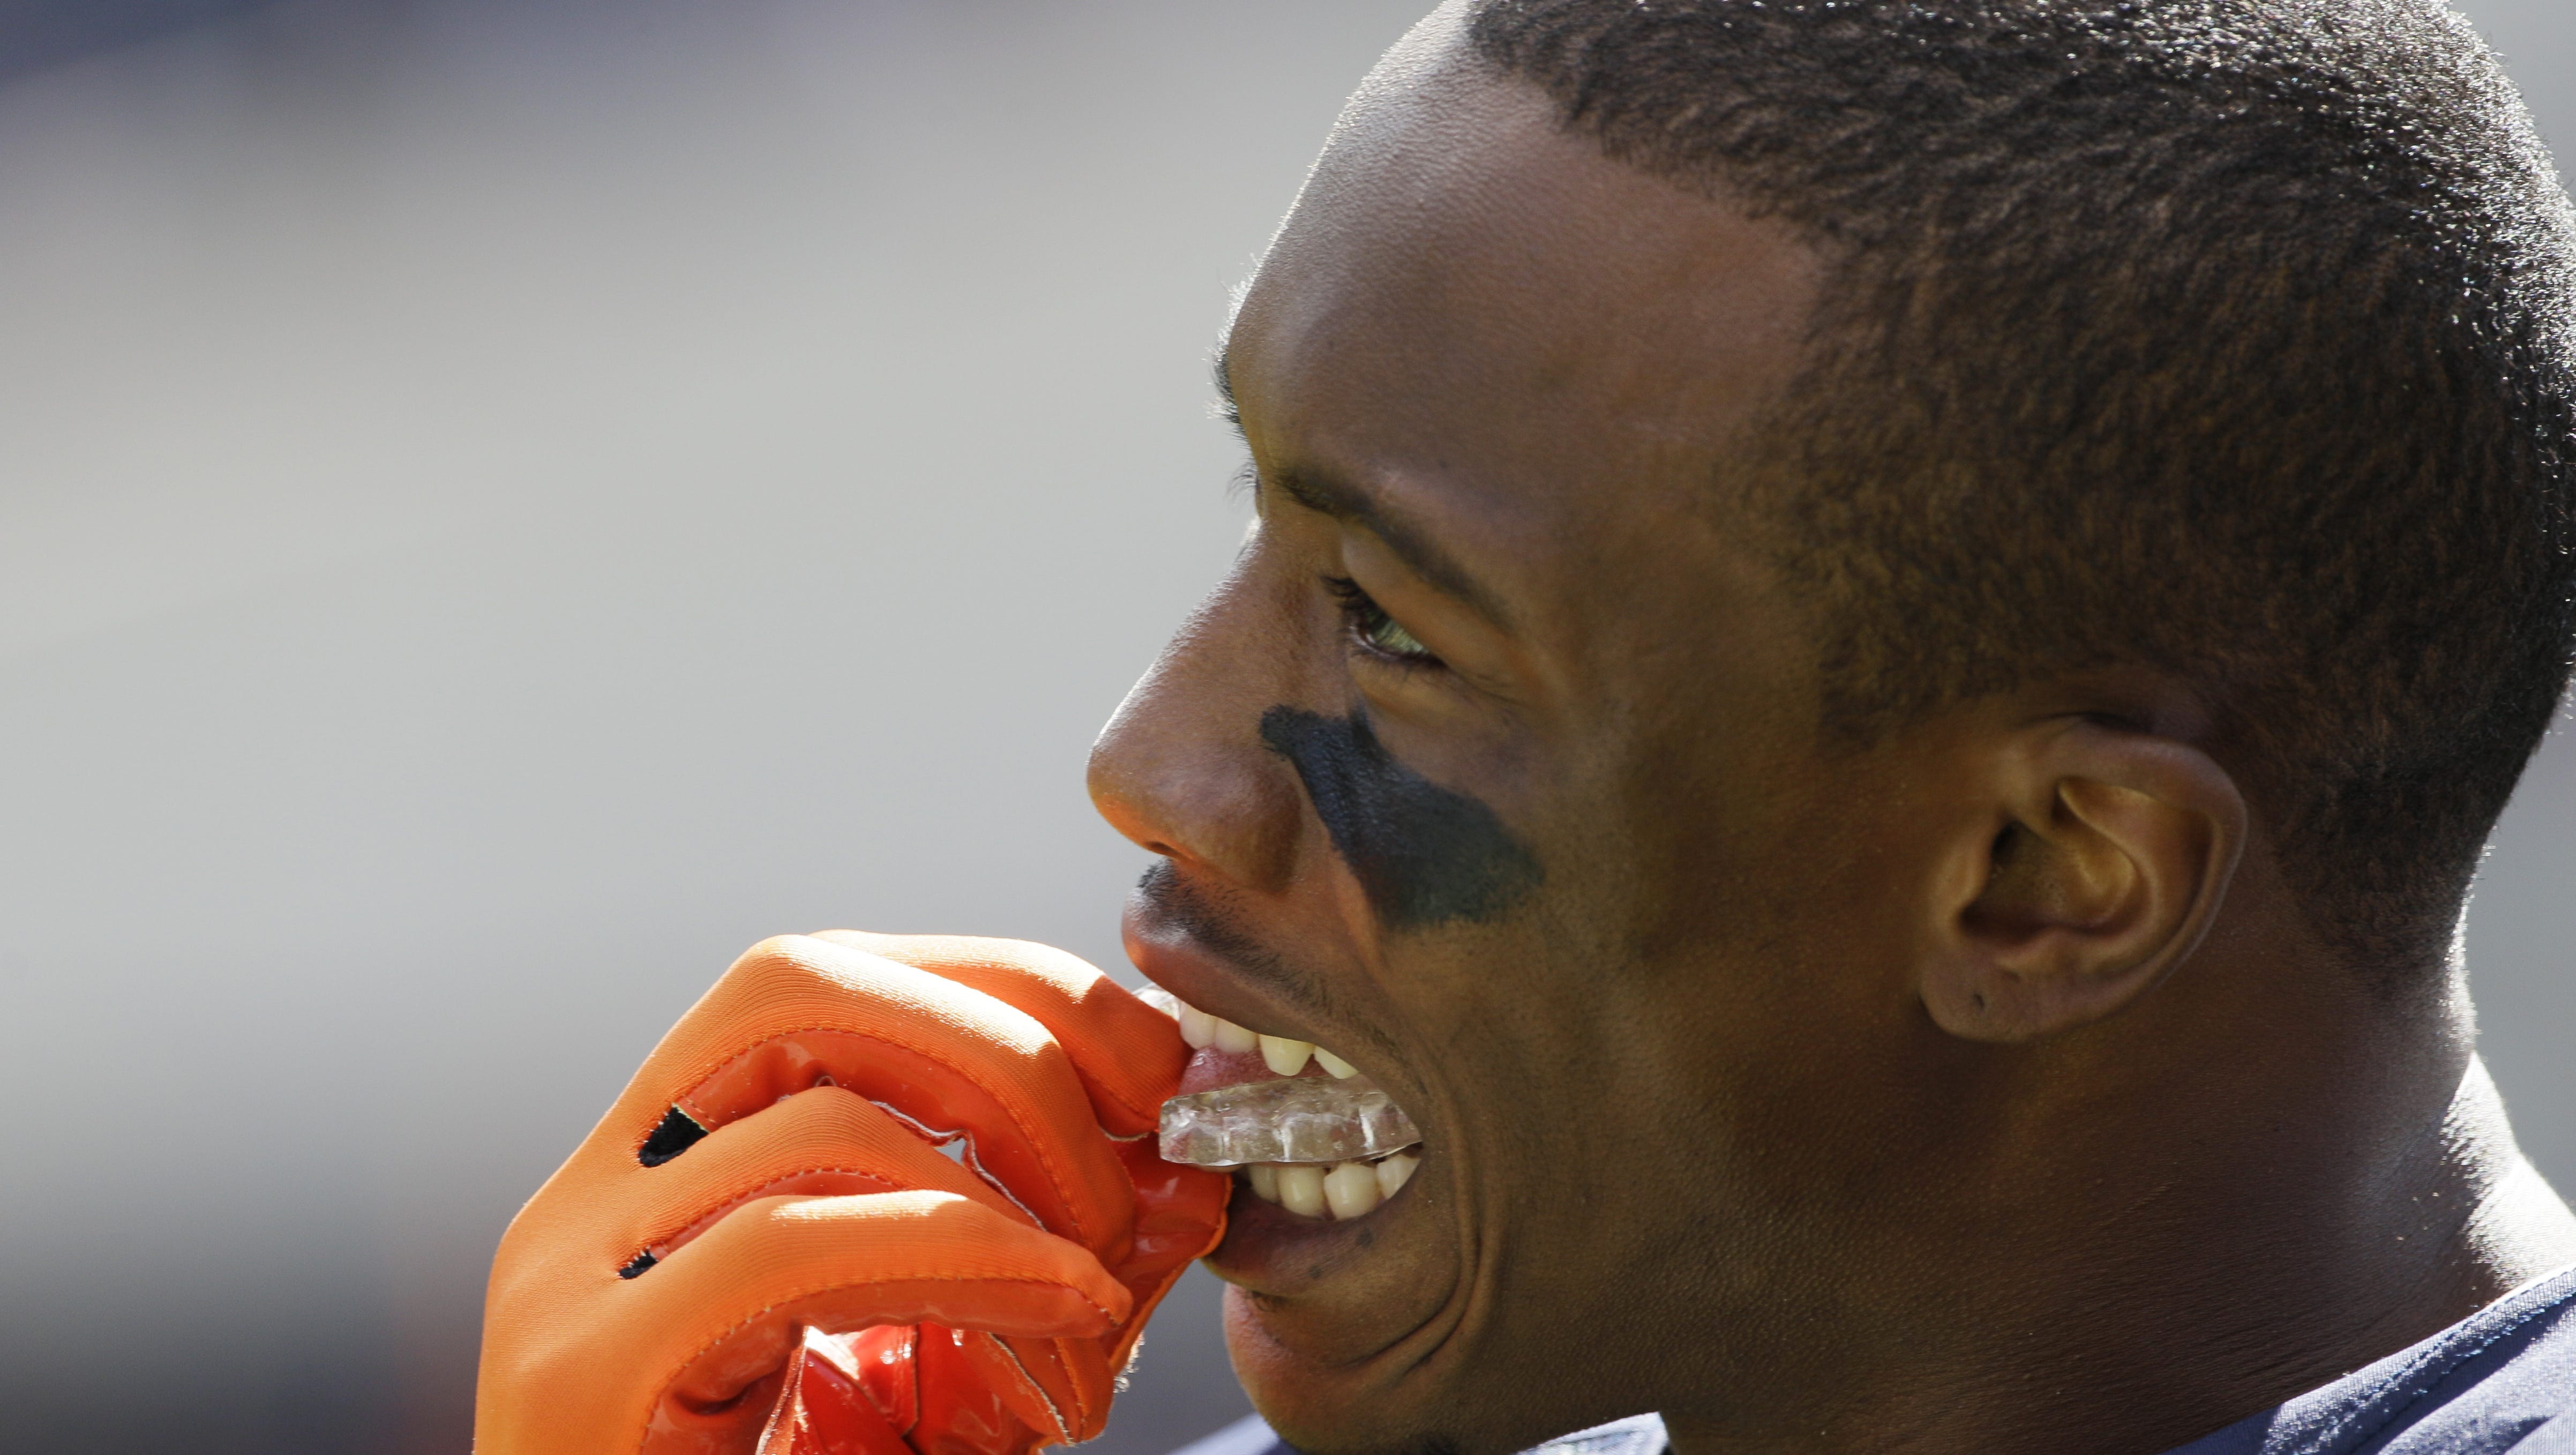 Animal Feces Not All That's In NFL Players' Mouthguards